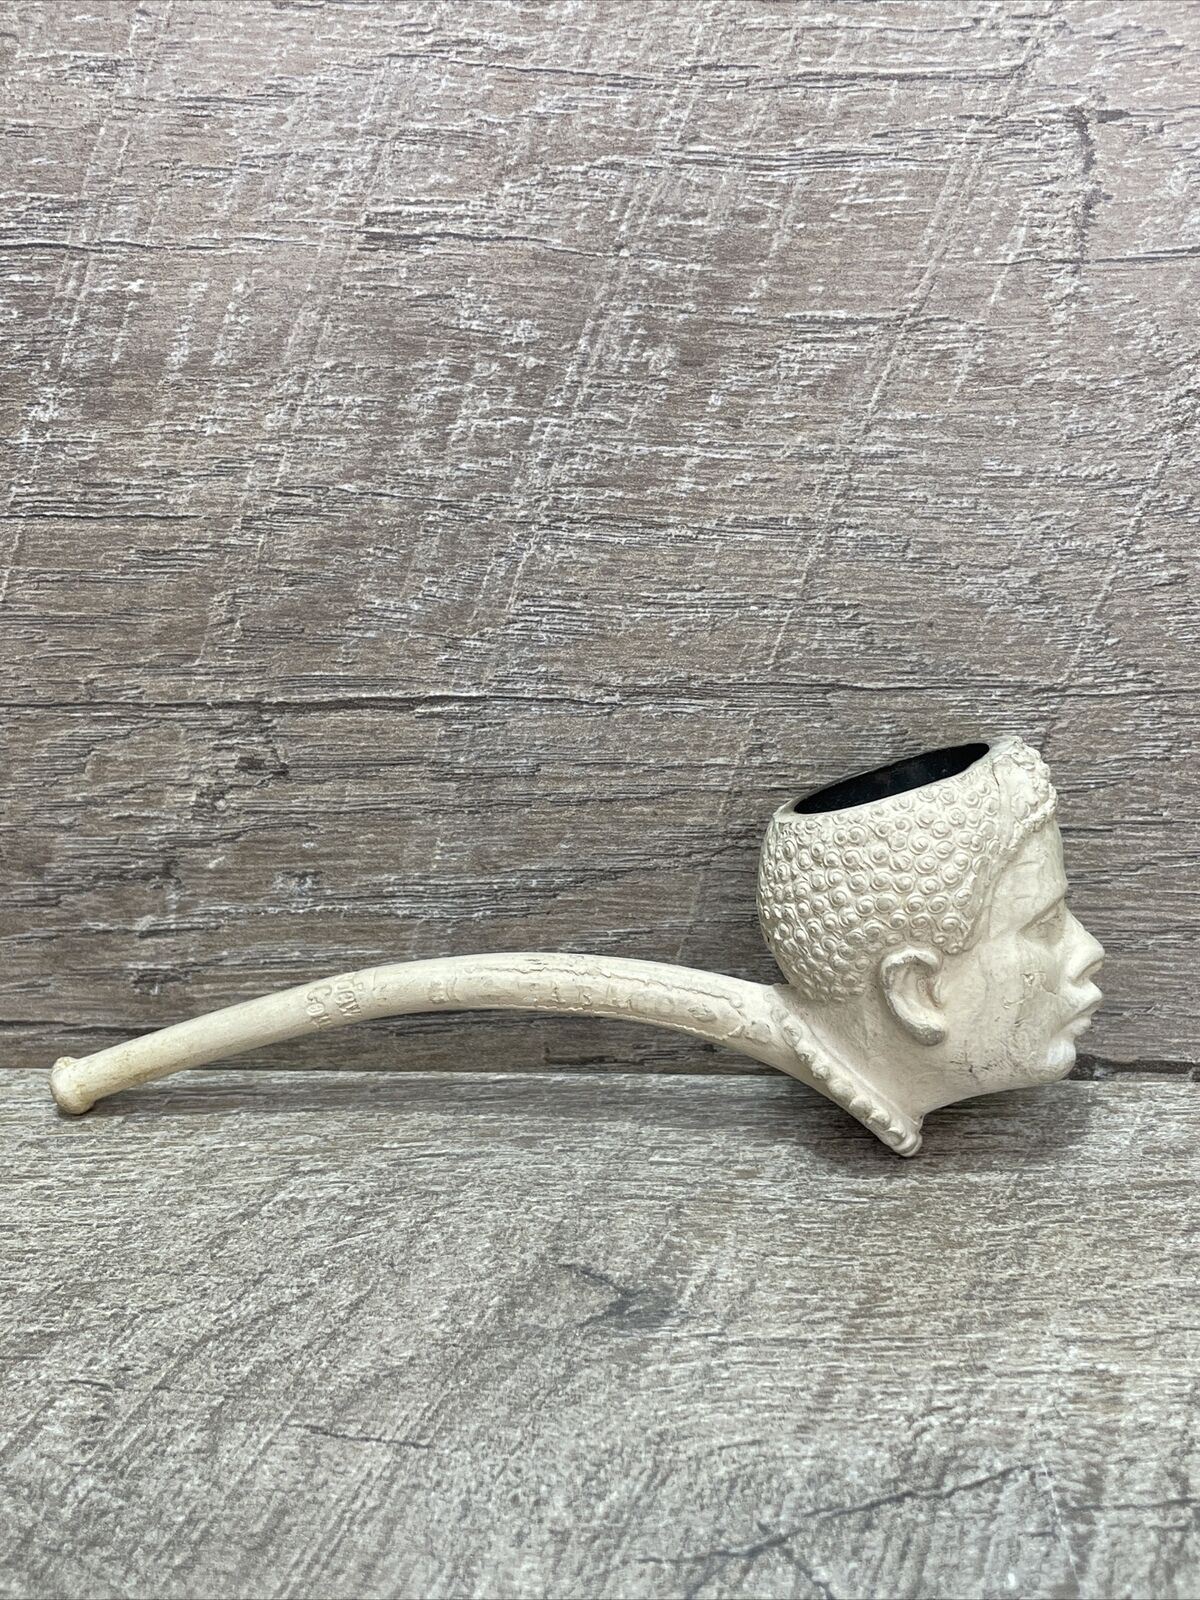 Antique French African Figure Clay Pipe Bon Fumeur Tobacco Americana Import 1920